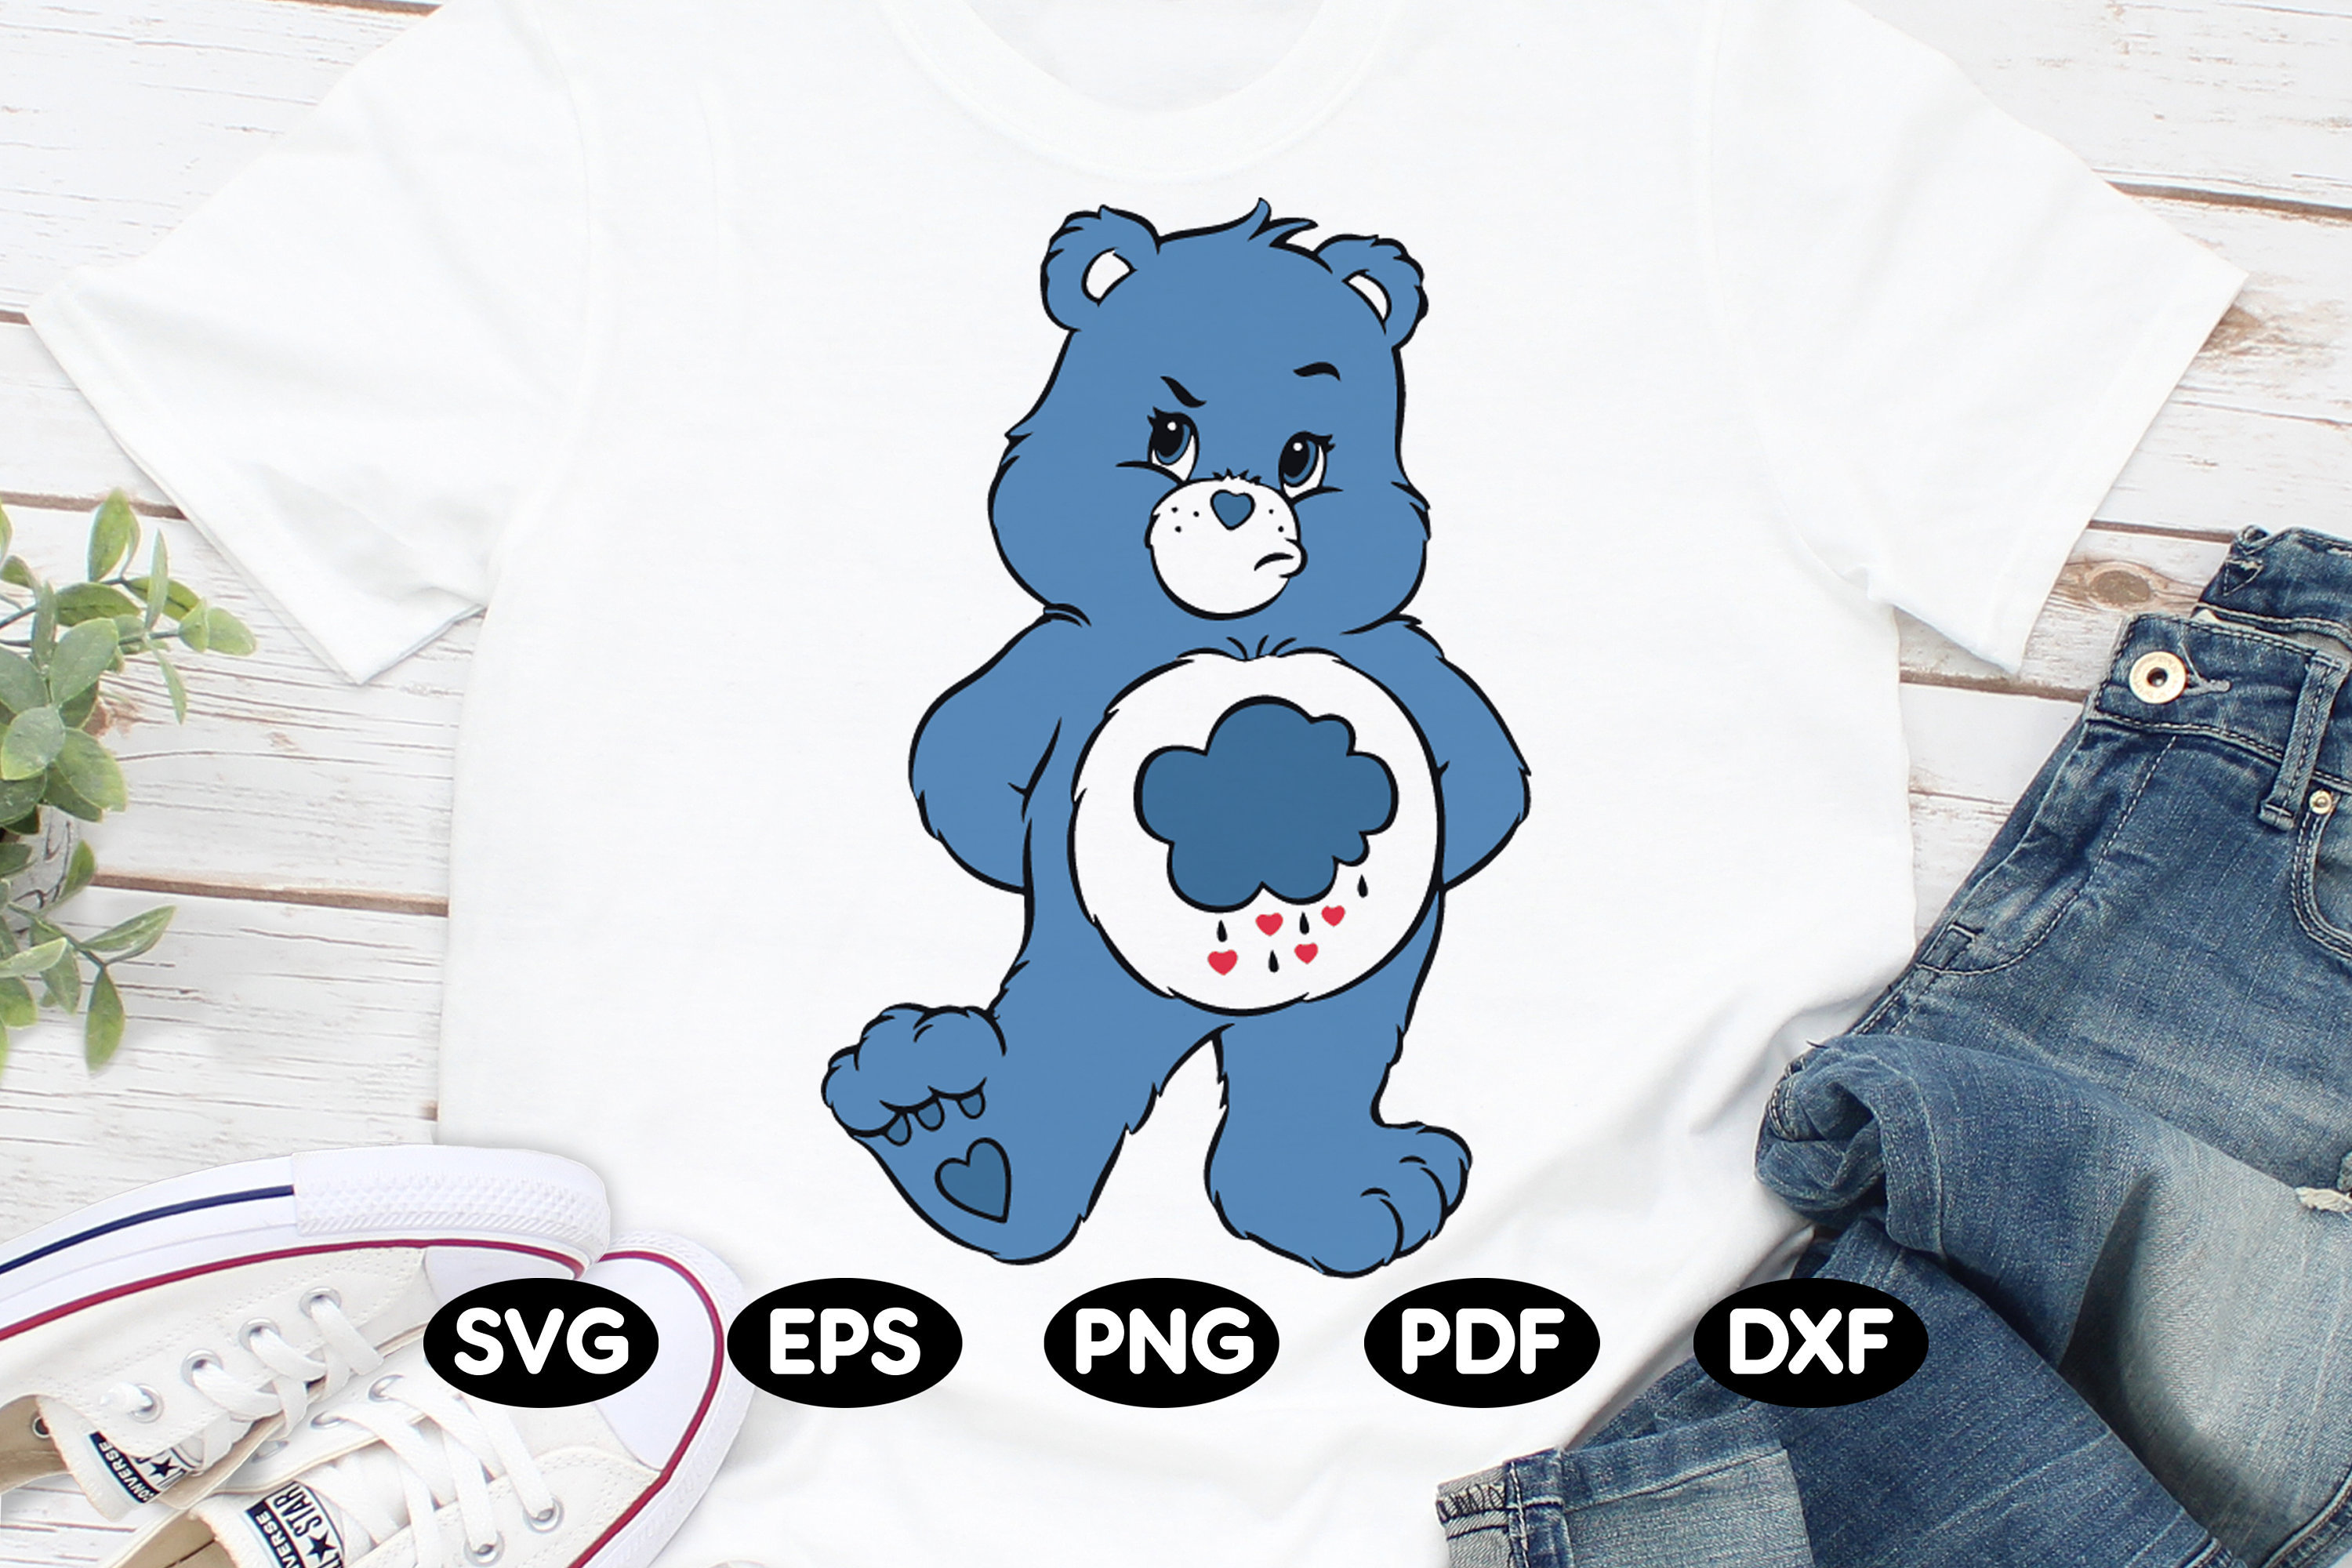 Care bears Grumpy bear in Svg Png Dxf Eps Pdf format Instant | Etsy